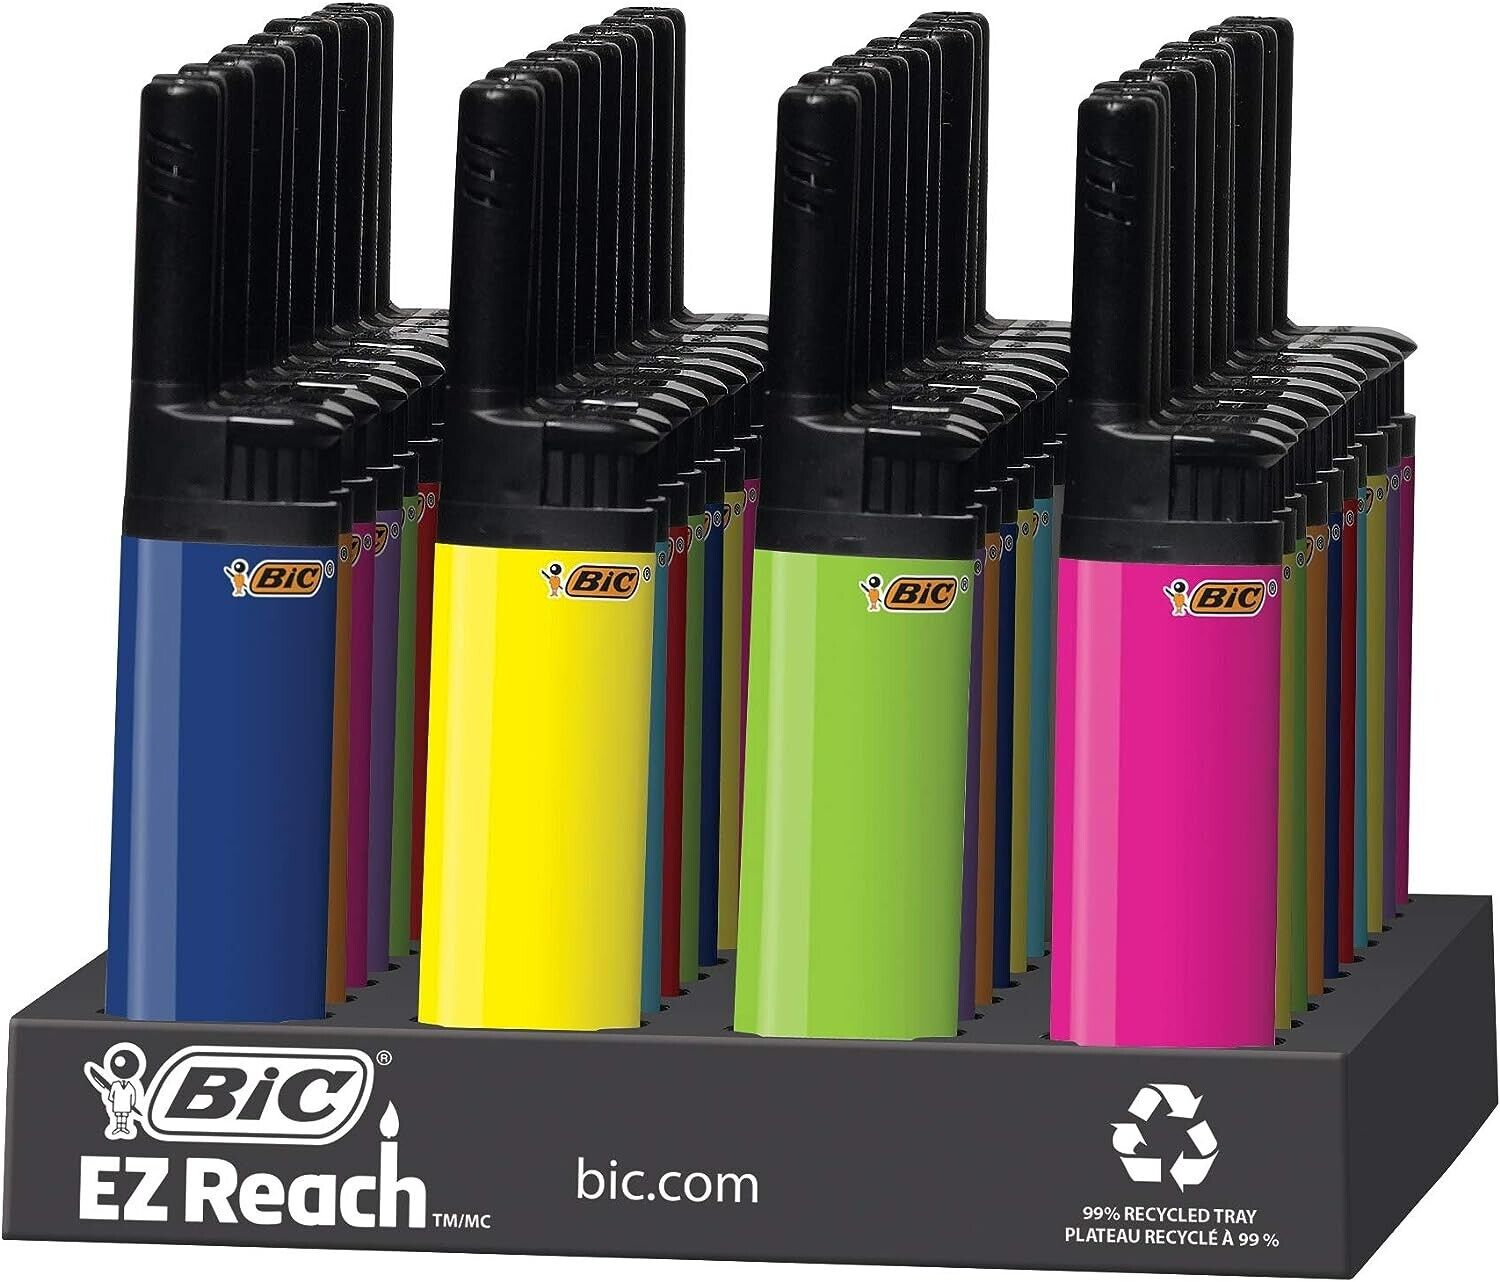 BIC EZ Reach Lighter, Assorted Colors, 40-Count Tray, Great for Candle Lighting. Available Now for 72.99